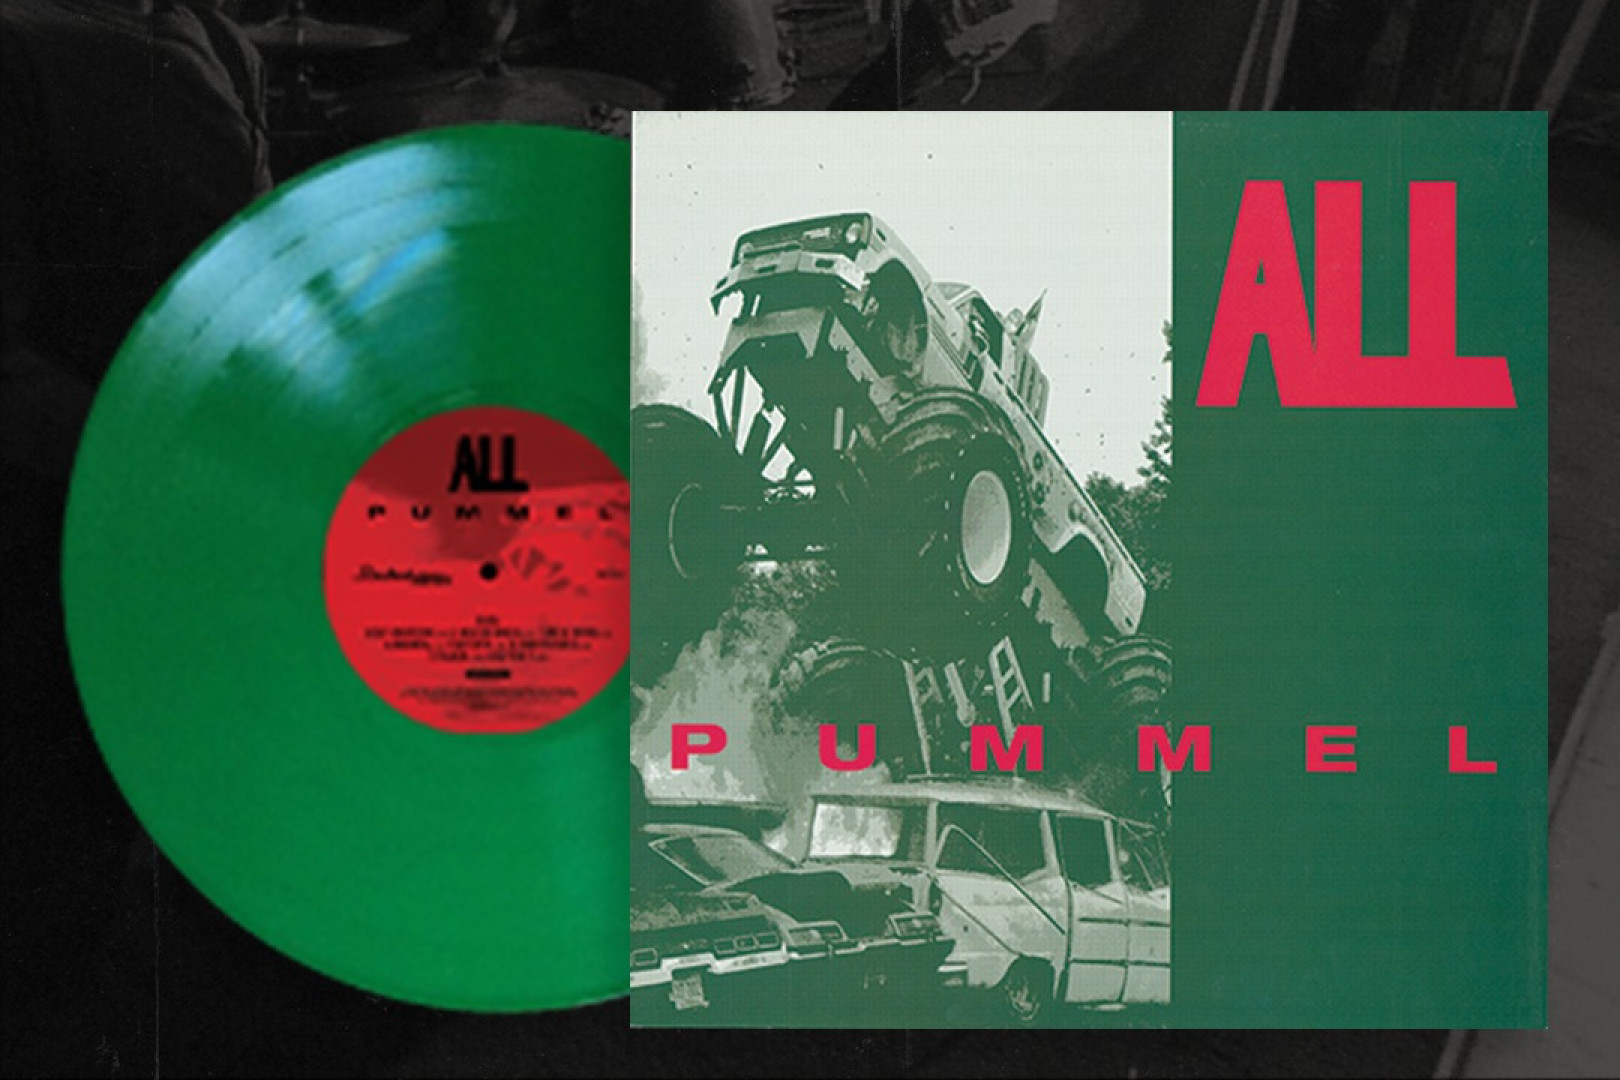 Long Delayed Re-issue of All's 'Pummel' to be released after two years in limbo